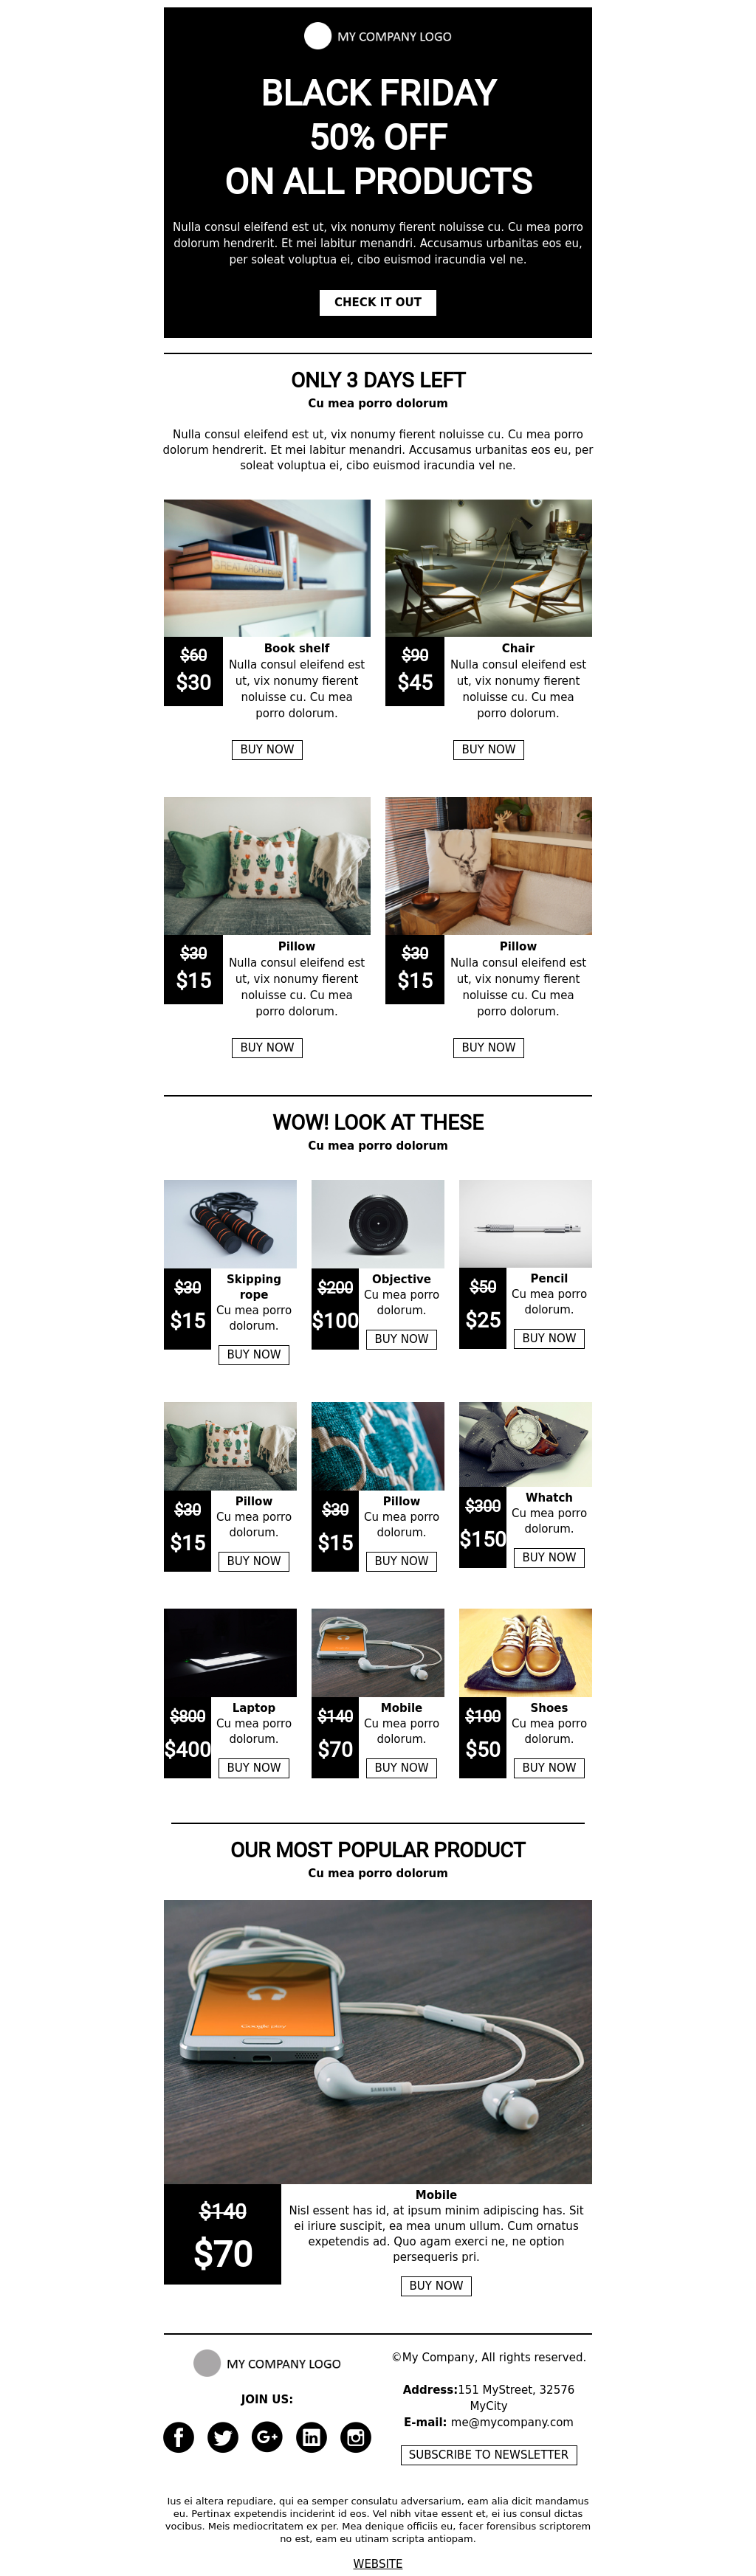 Ecommerce Black Friday flat design email template